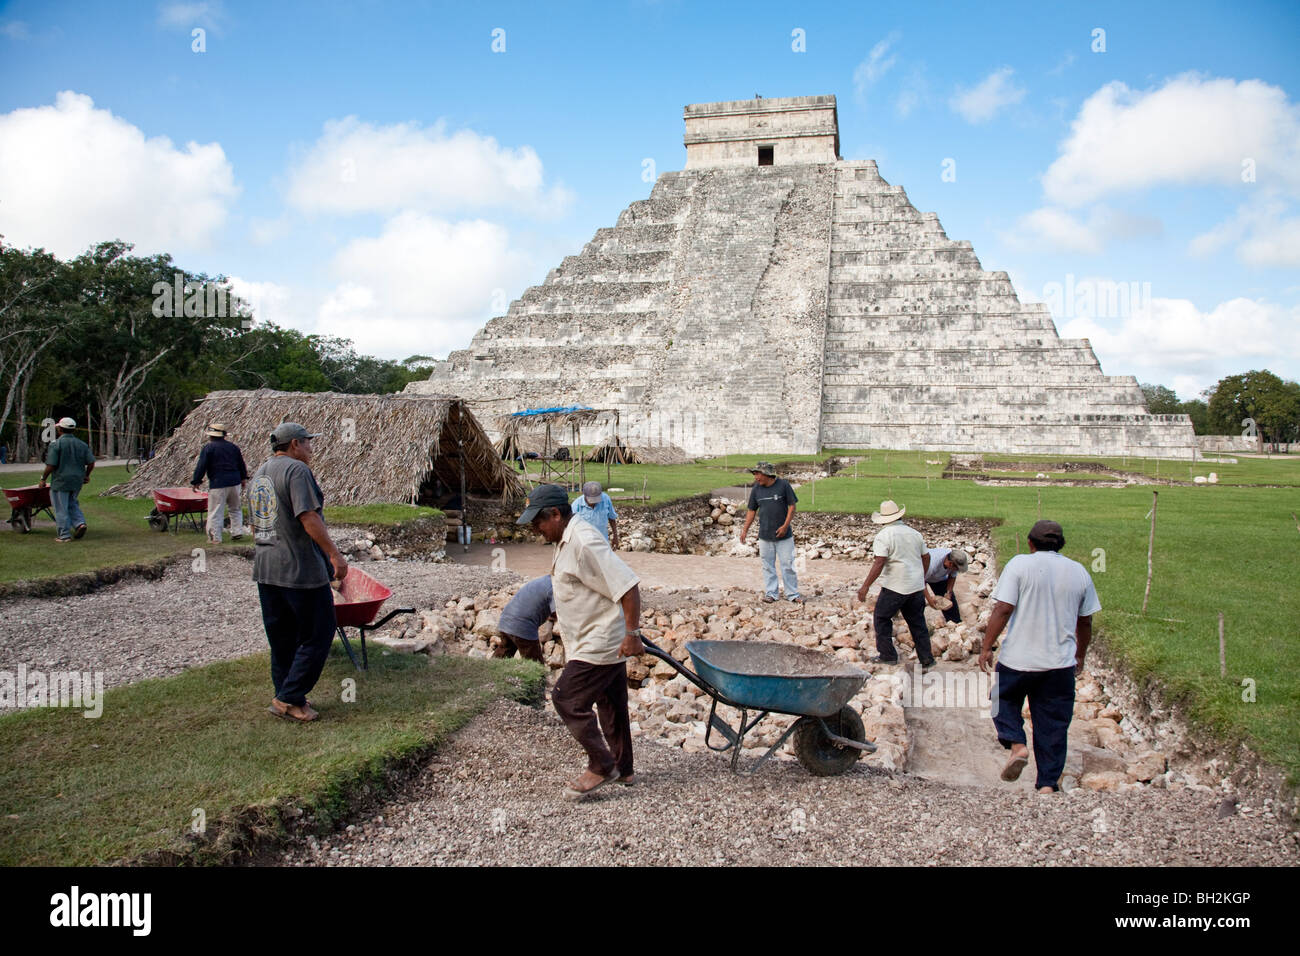 The Castle or Pyramid of Kukulcan. Chichen Itza Archaeological Site Yucatan Mexico. Stock Photo